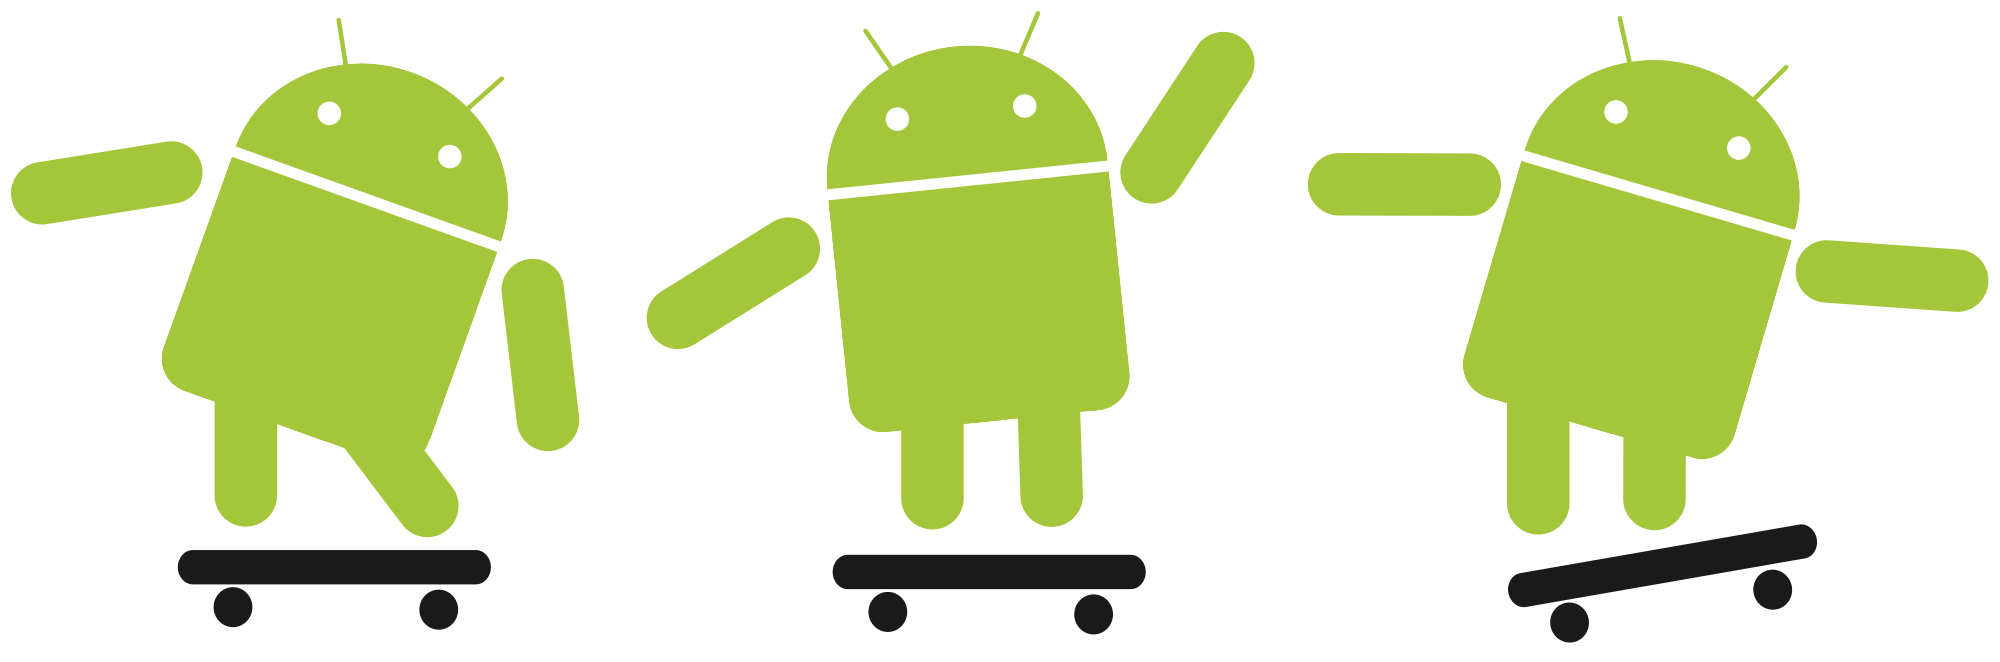 Download PNG image - Android Robot Transparent PNG 